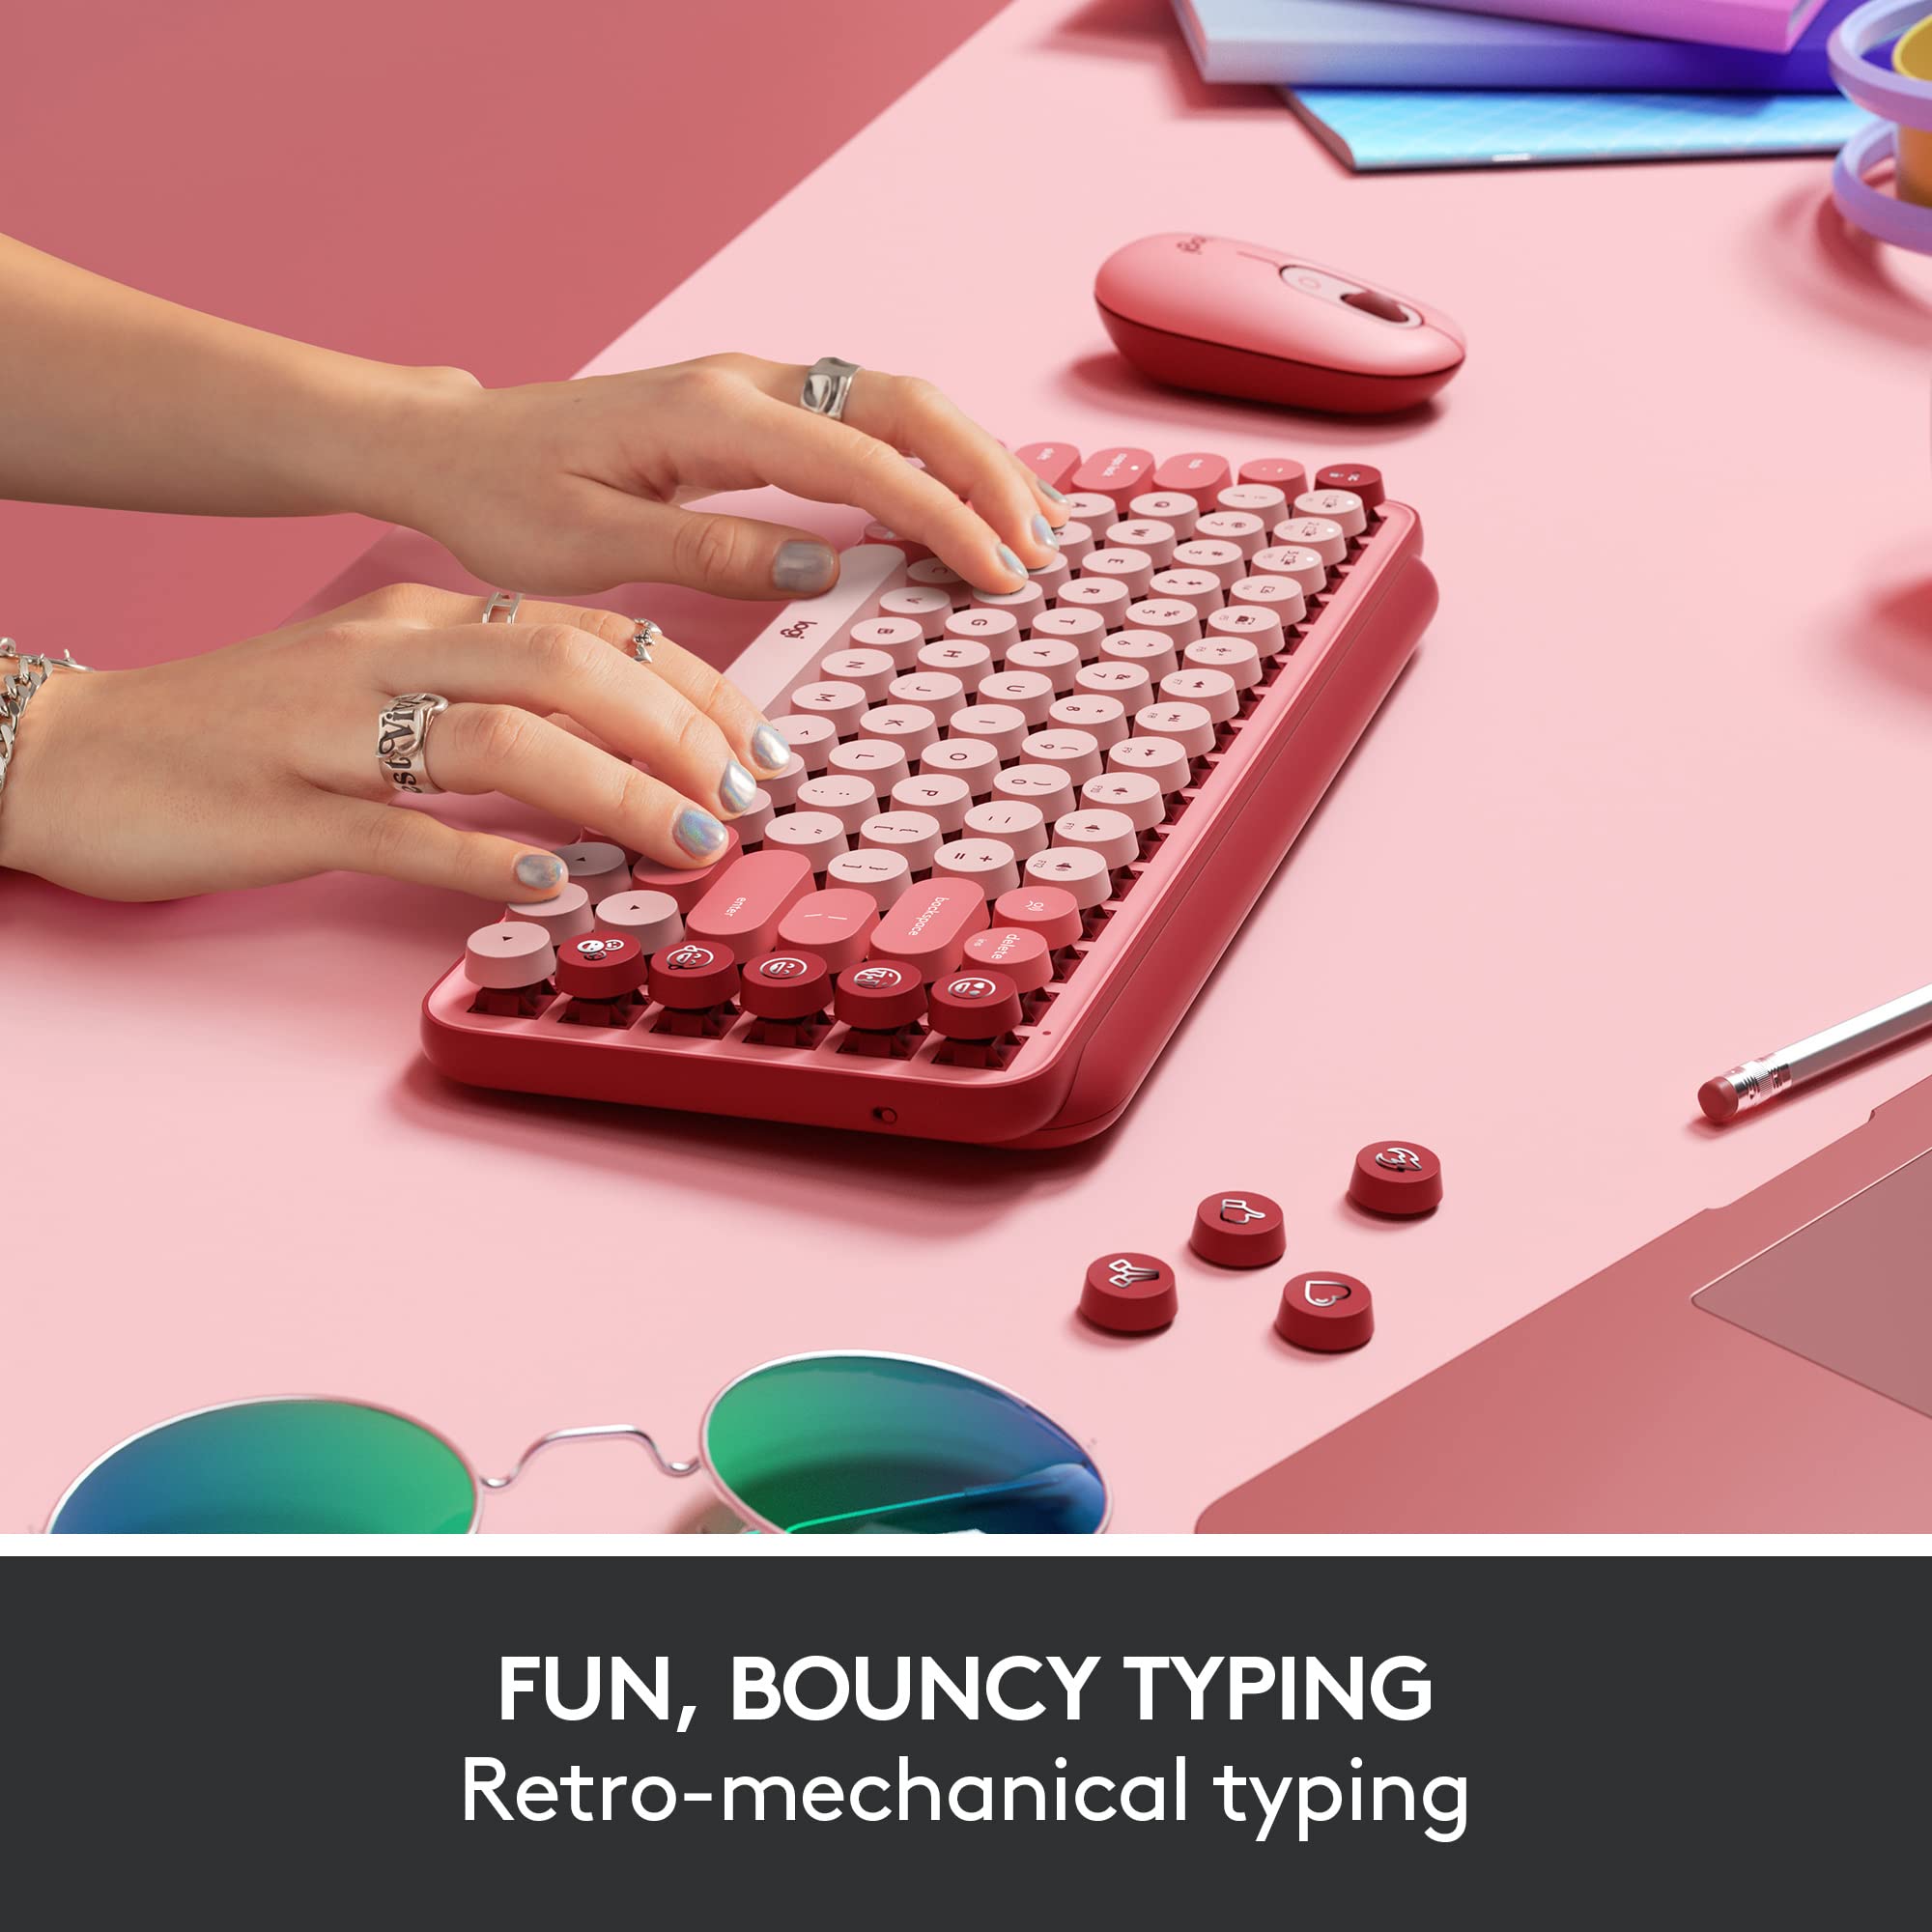 Logitech POP Wireless Mouse and POP Keys Mechanical Keyboard Combo - Customisable Emojis, SilentTouch, Precision/Speed Scroll, Bluetooth, Multi-Device, OS Compatible - Heartbreaker Rose